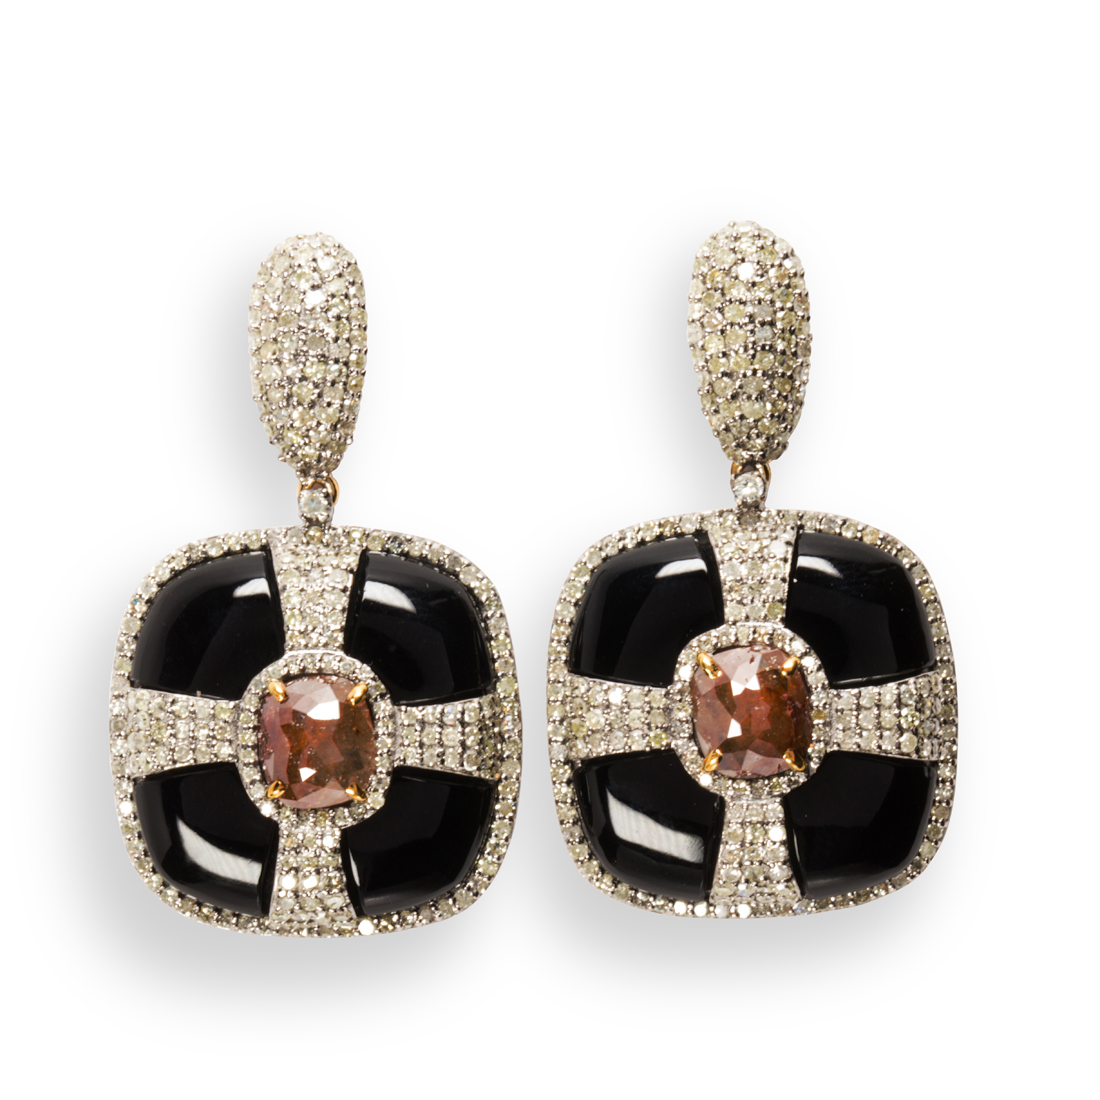 A PAIR OF BLACK CHALCEDONY, COLORED